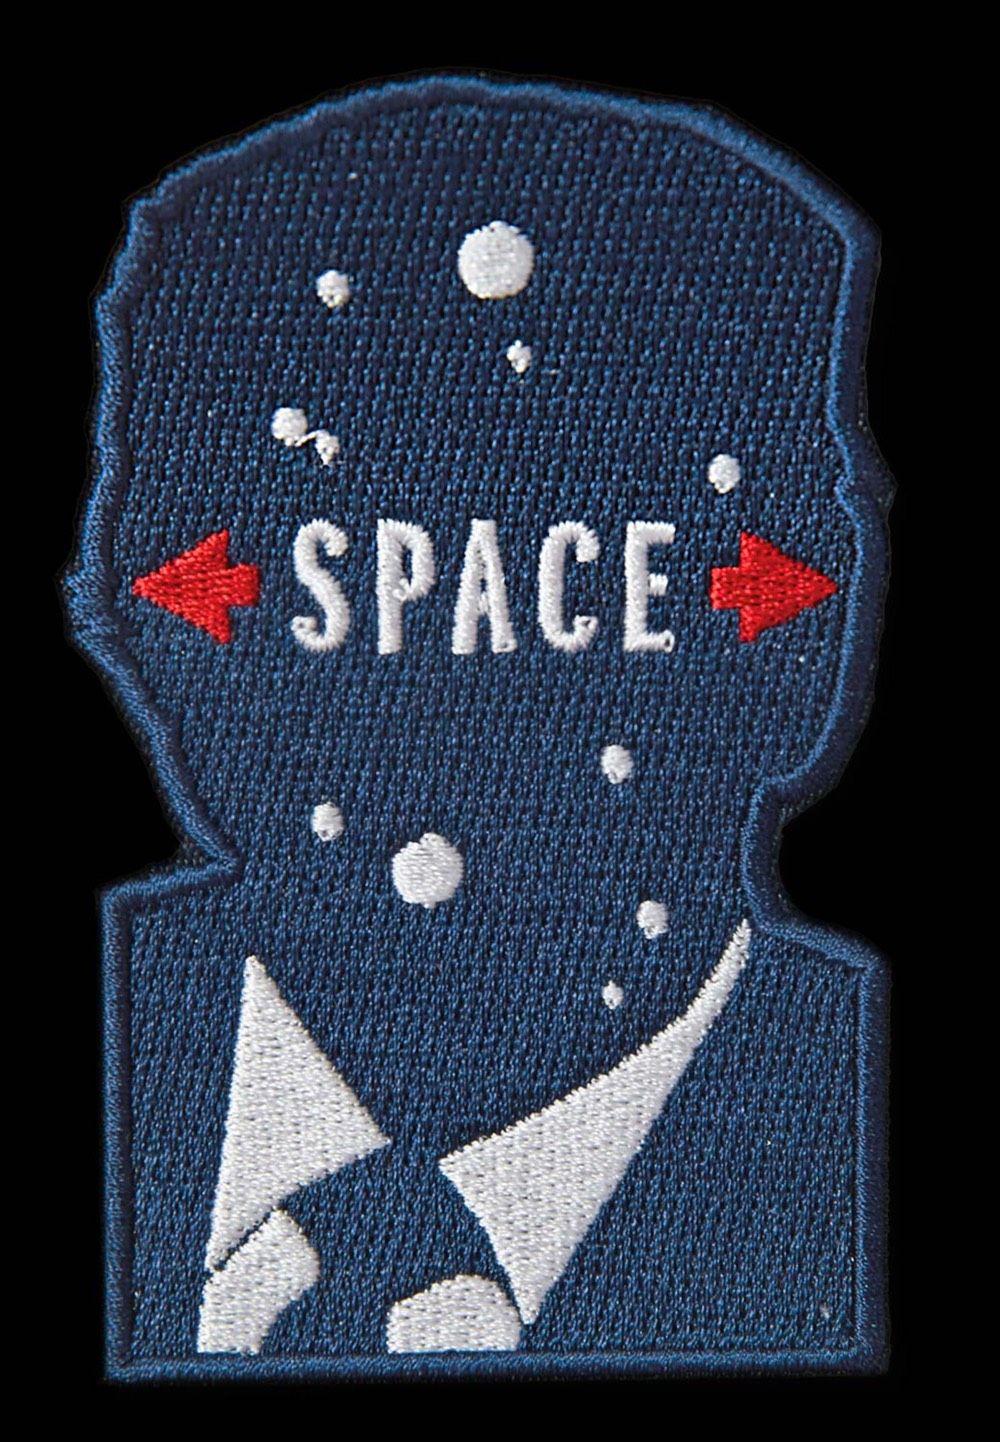 Space Force Logo - Logos for Trump's Space Force from eight leading designers